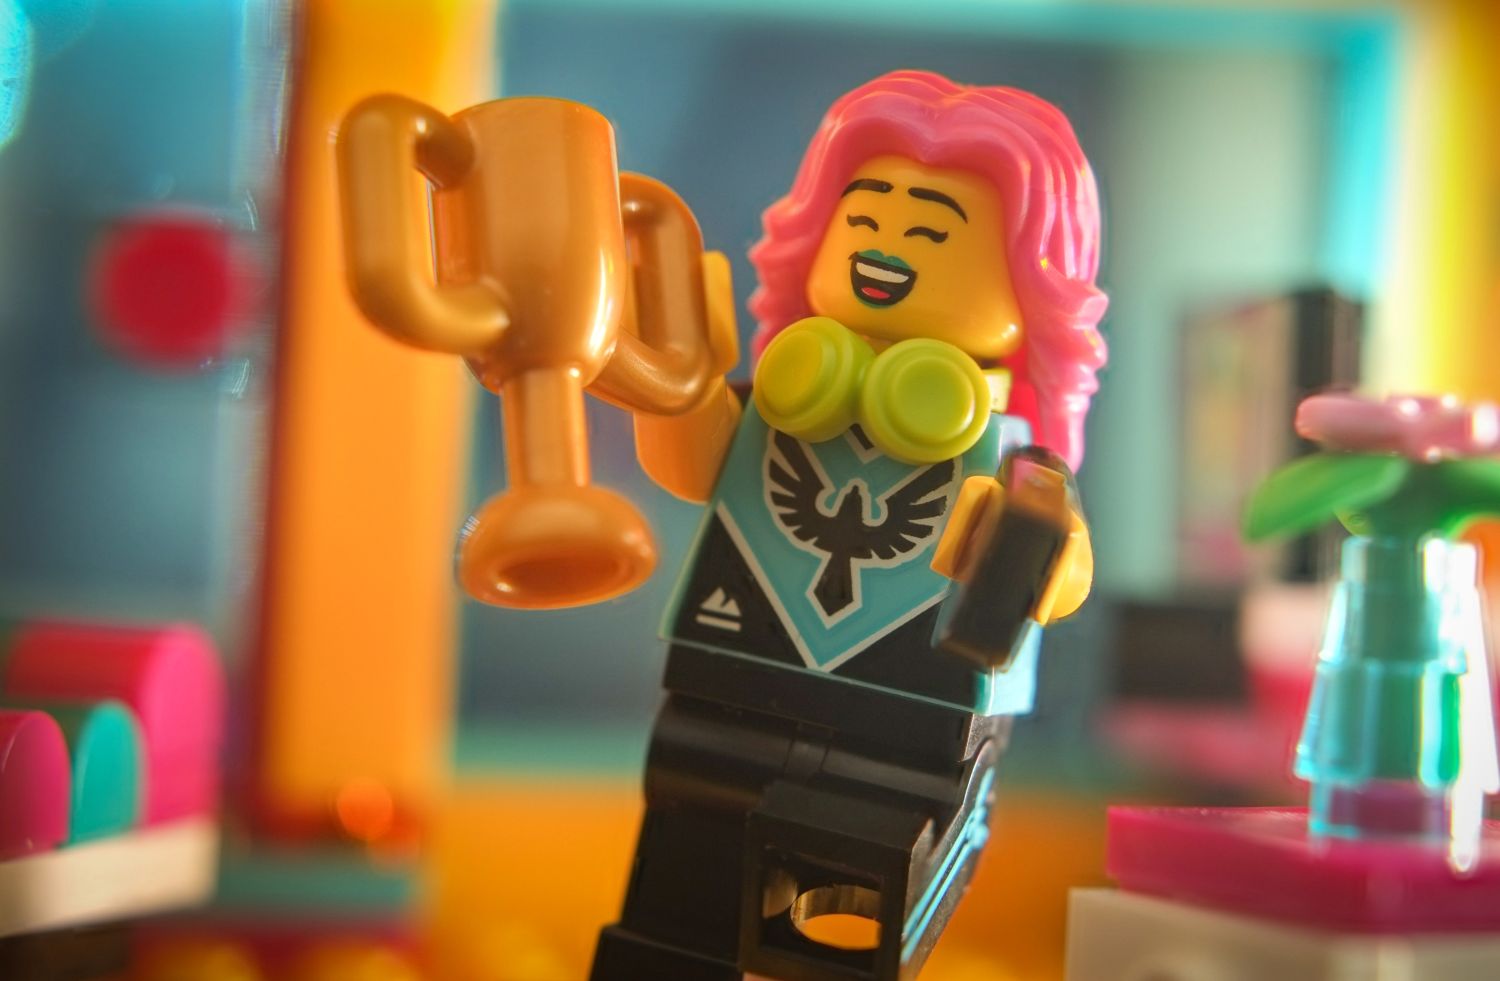 A LEGO video player minifigure smiling, holding a golden cup in her hand.